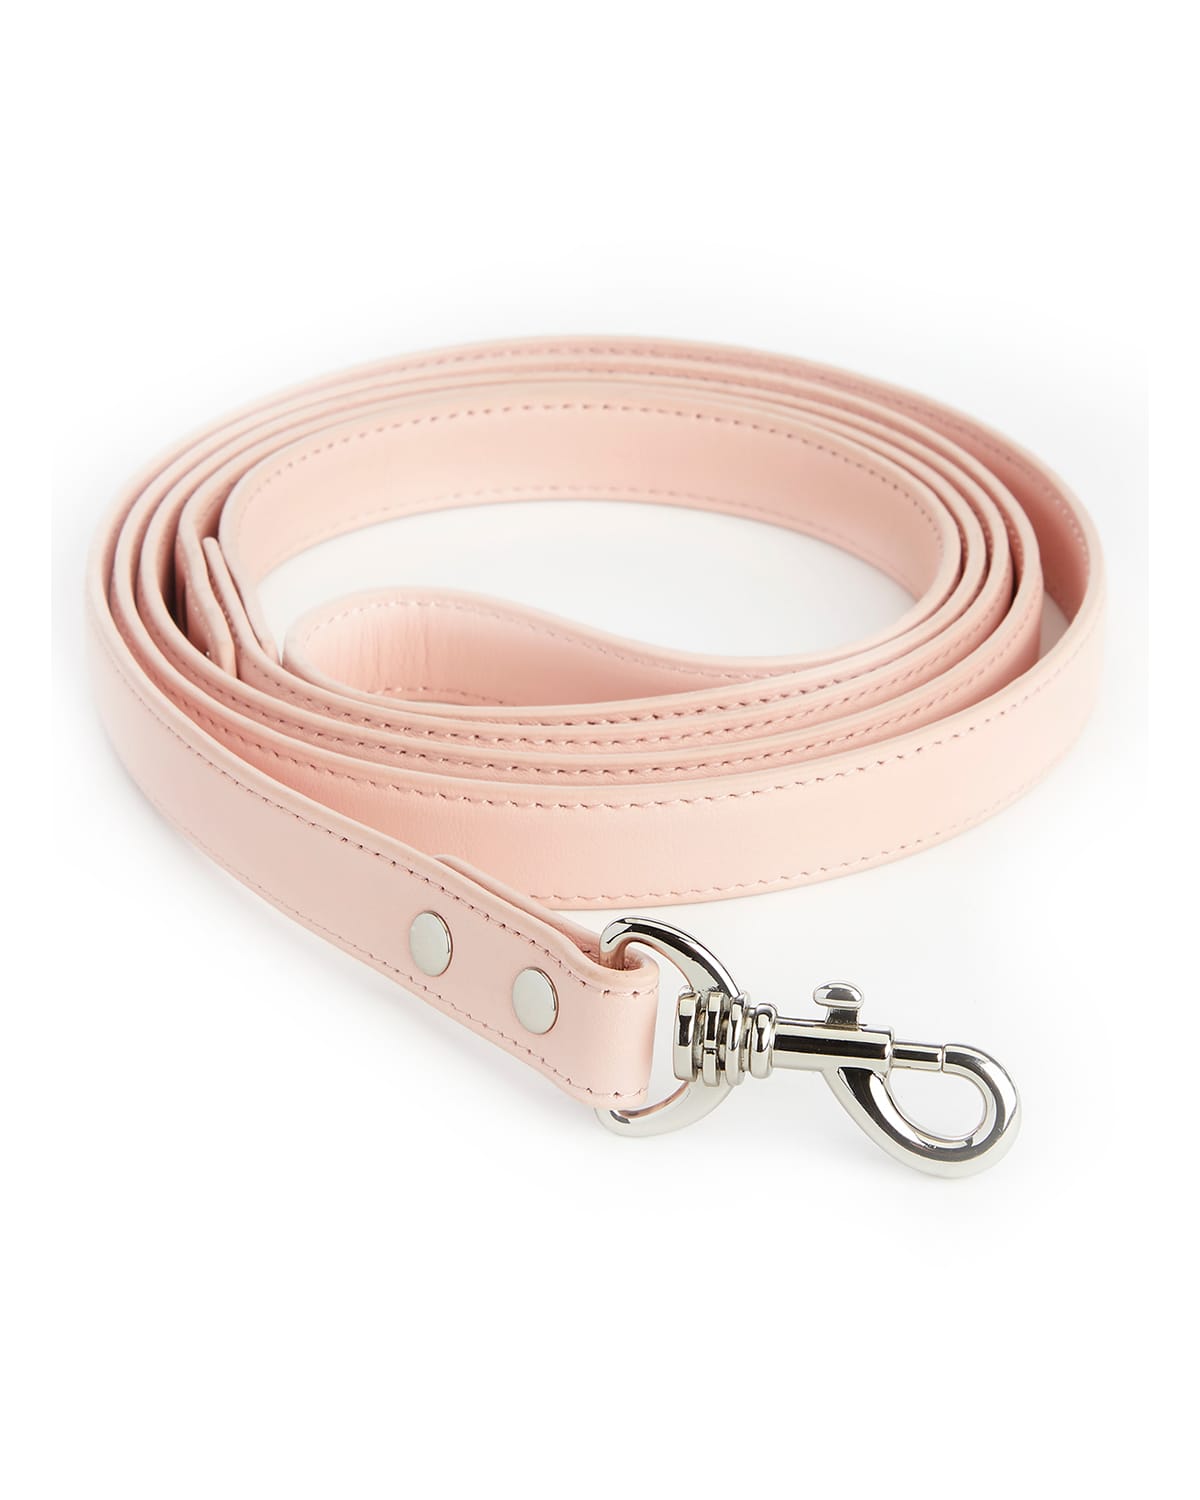 Royce New York Luxe 6' Dog Leash In Blush Pink